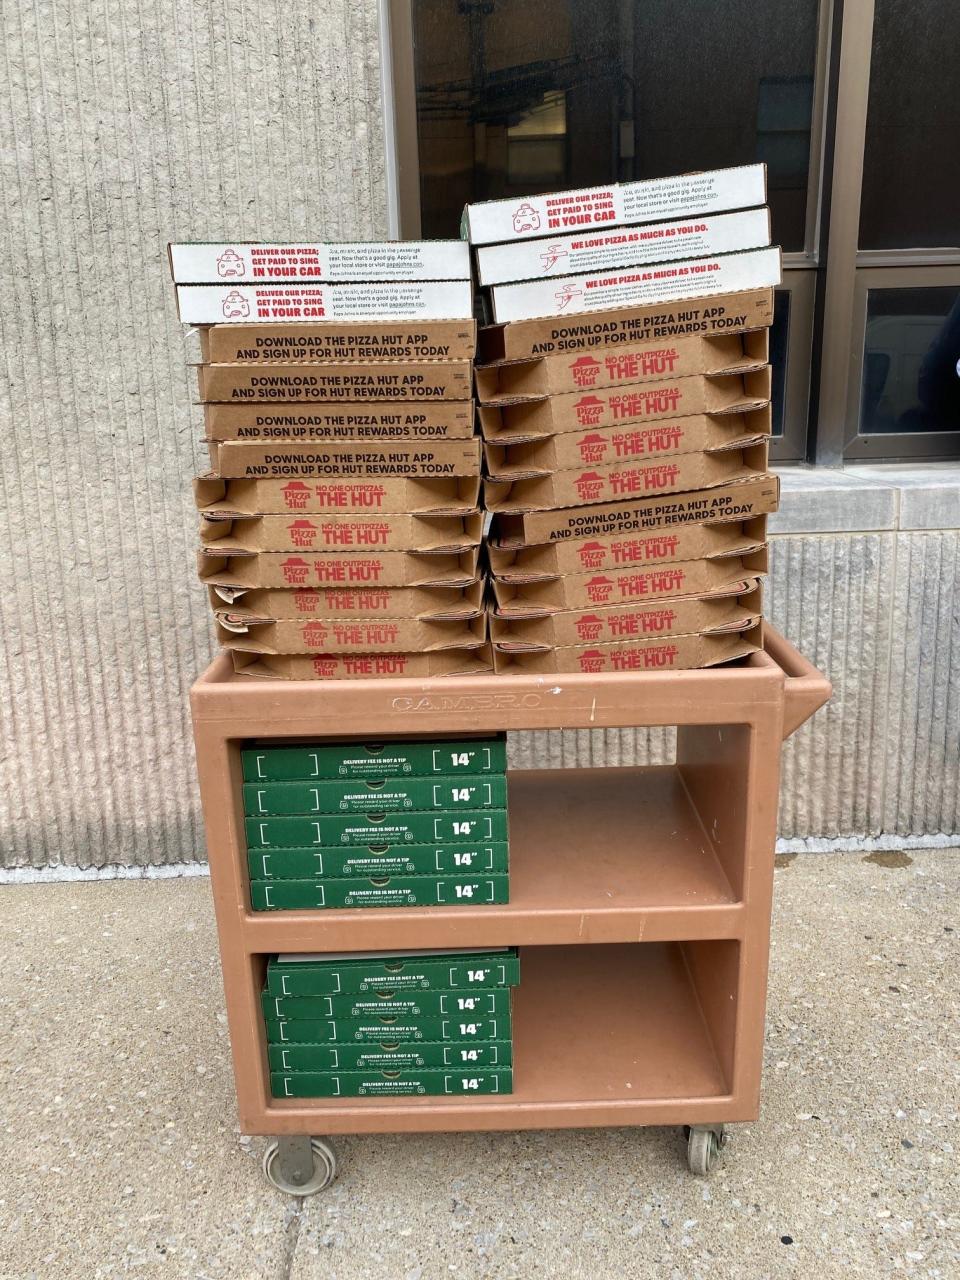 Pizza was provided to inmates for the evening meal after a gas leak at the Monroe County Correctional Center on Sept. 20, 2023.